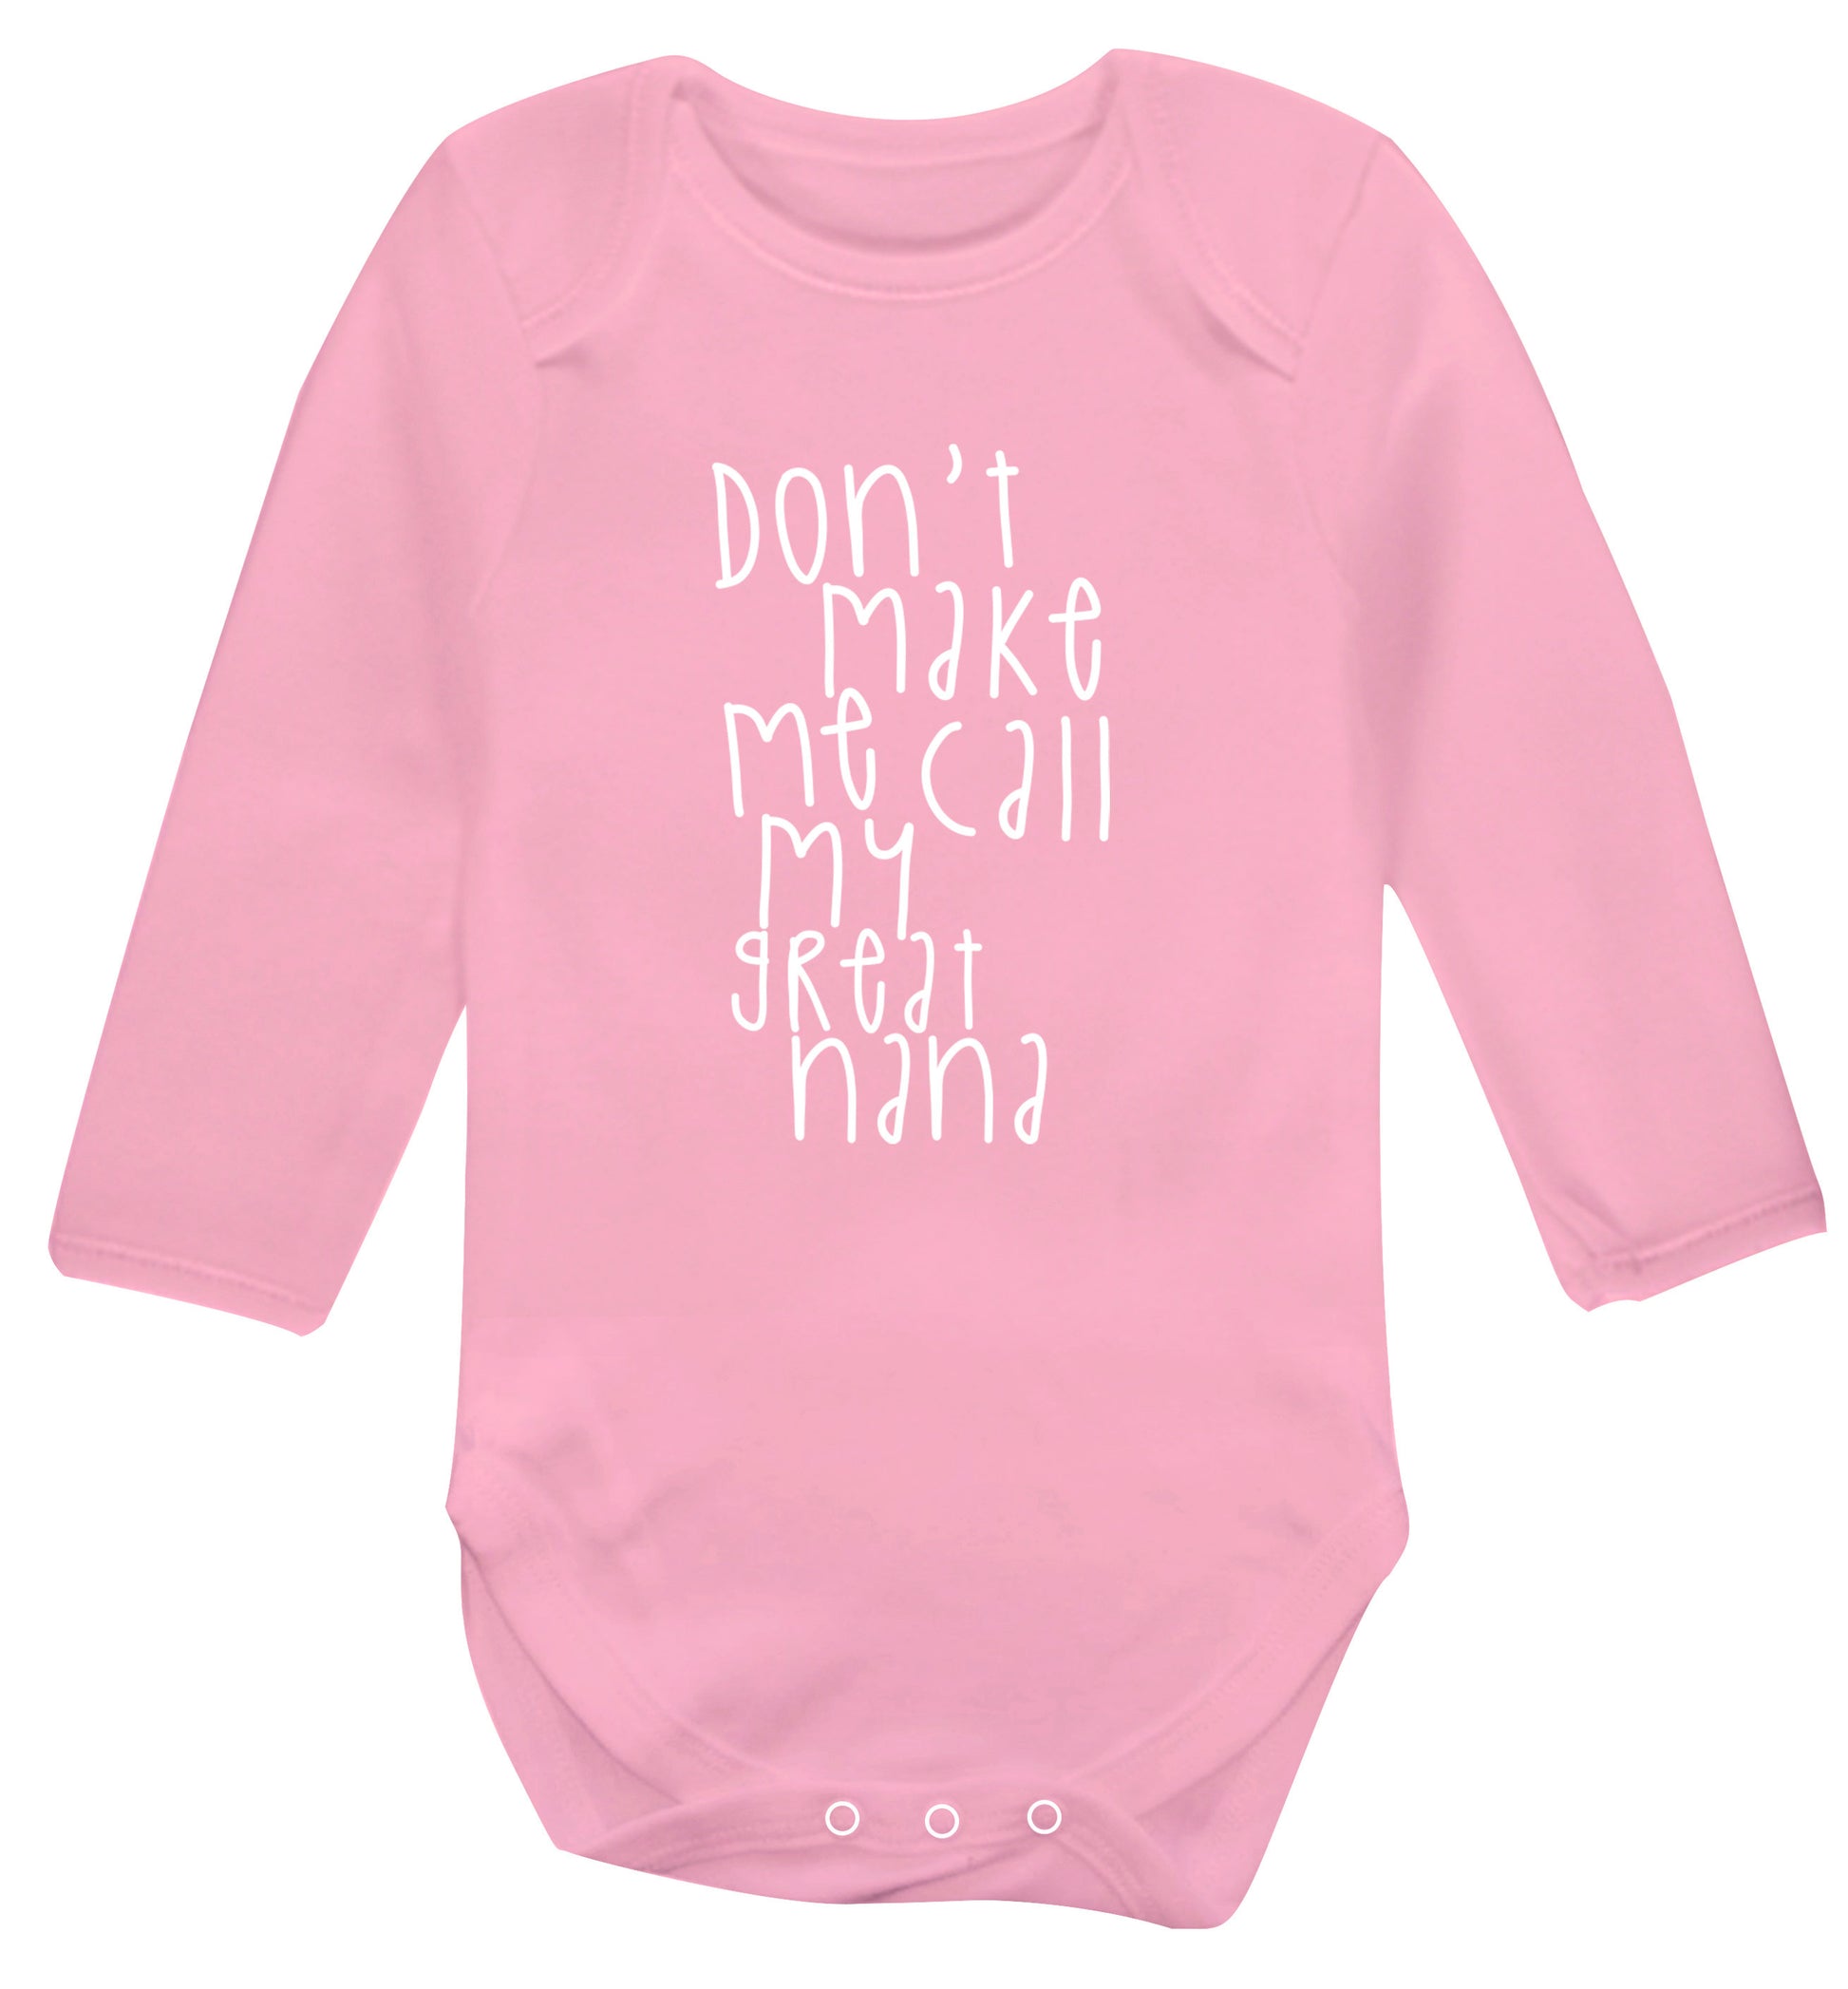 Don't make me call my great nana Baby Vest long sleeved pale pink 6-12 months